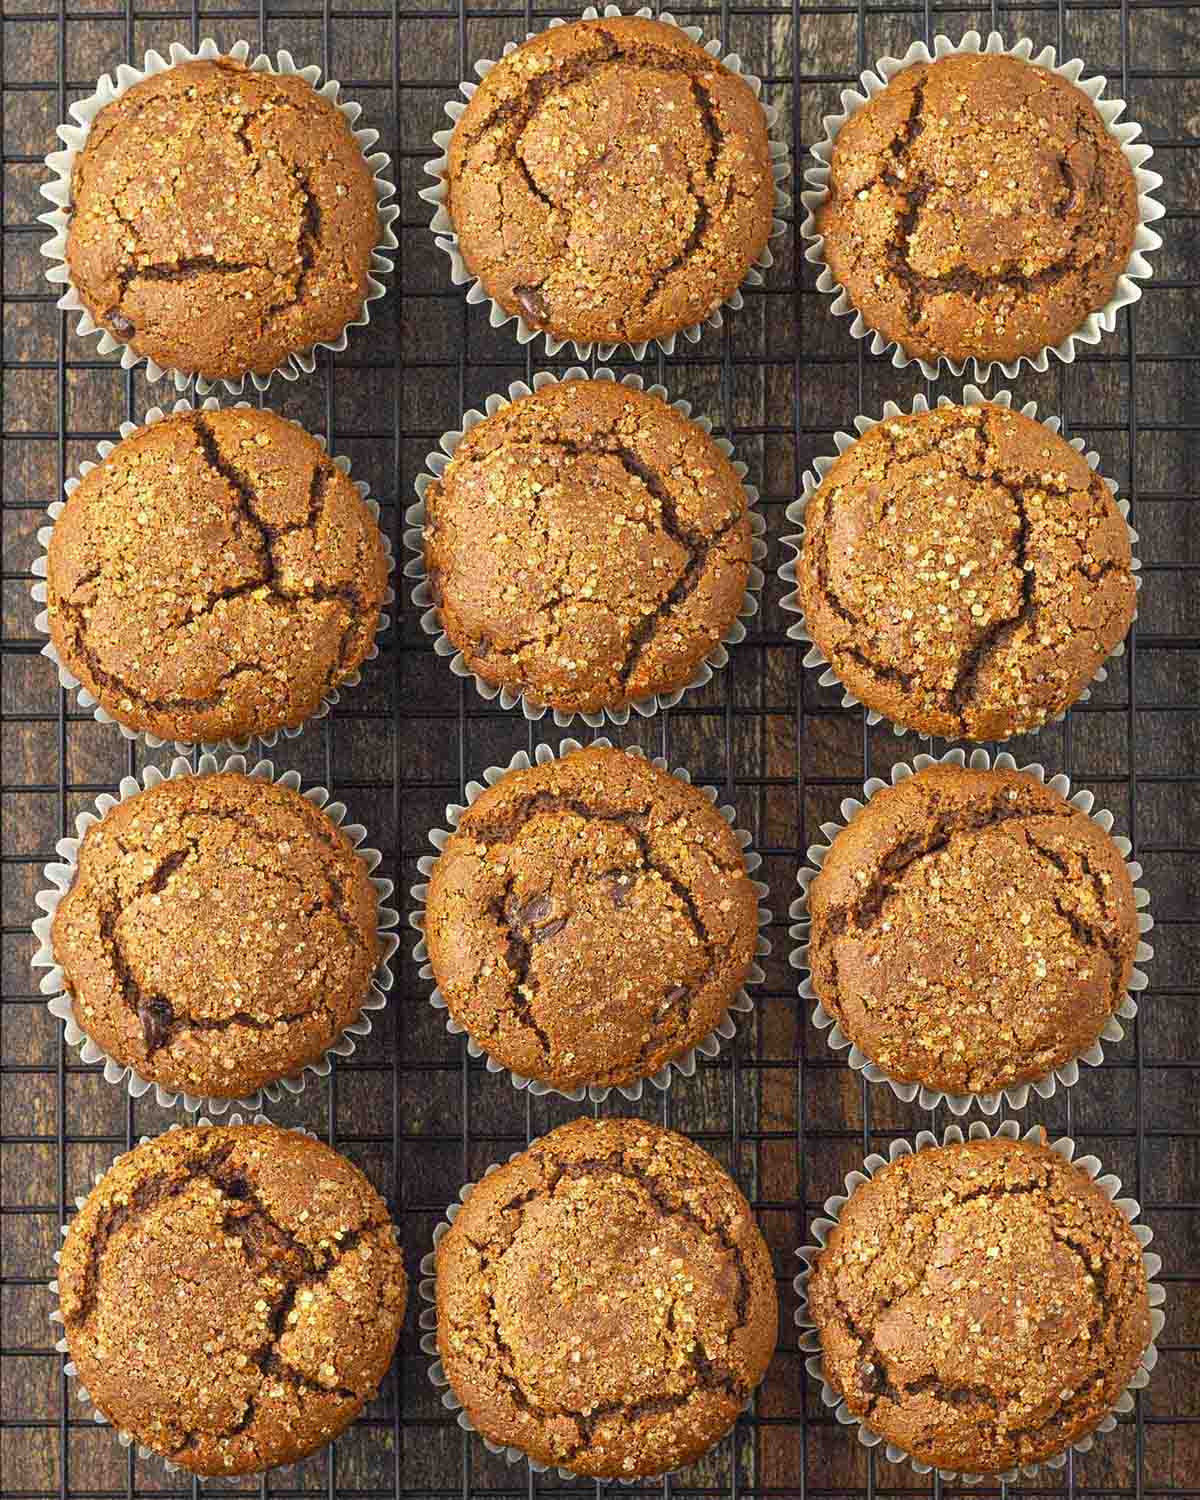 Freshly baked gingerbread muffins on a cooling rack.